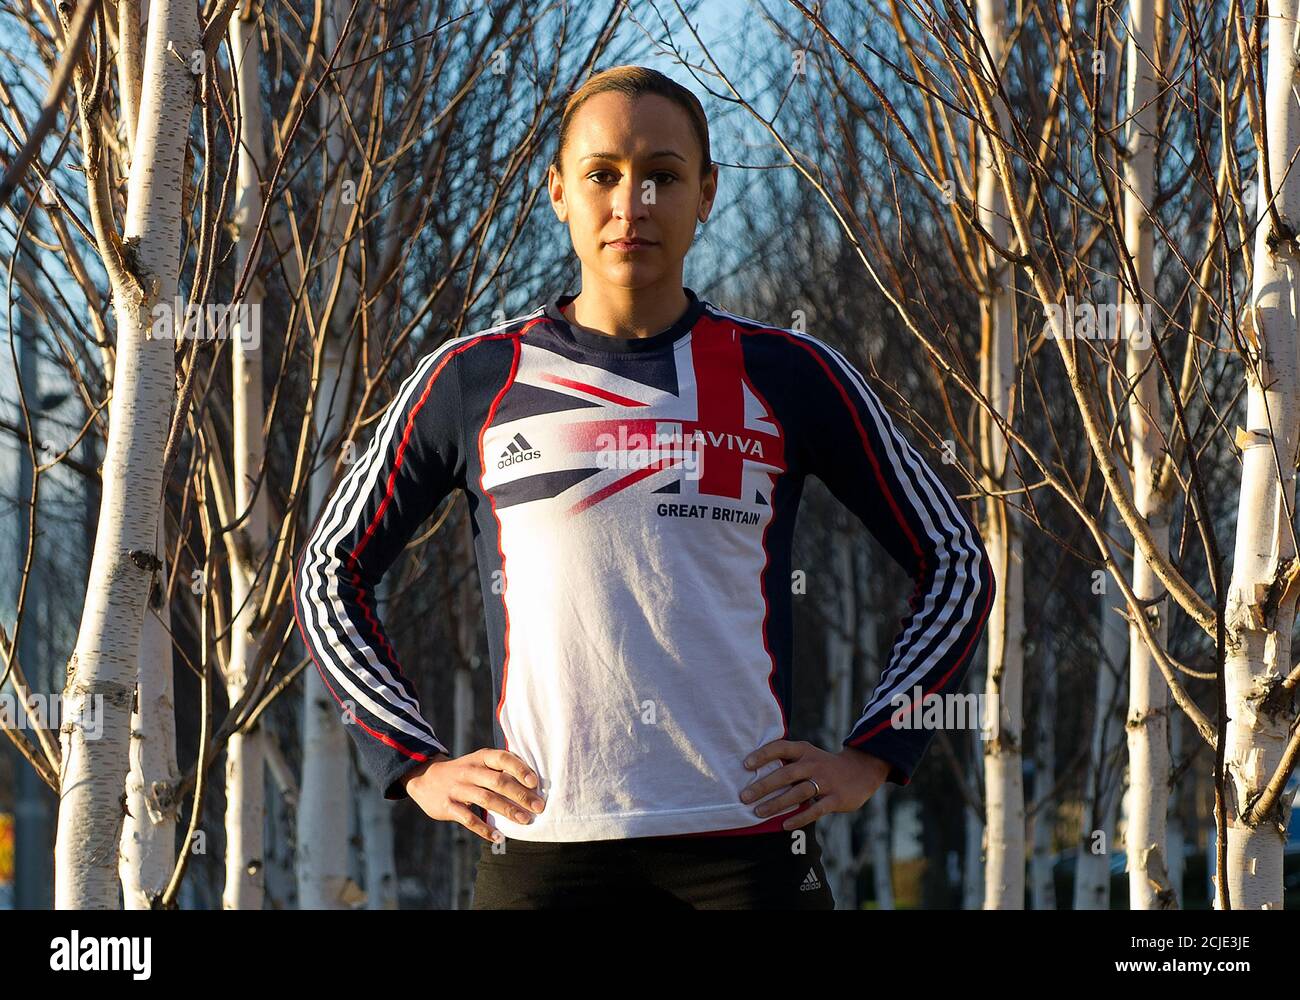 Jessica Ennis in Sheffield, Britain  - 15 Jan 2011 PICTURE CREDIT : MARK PAIN / ALAMY Stock Photo